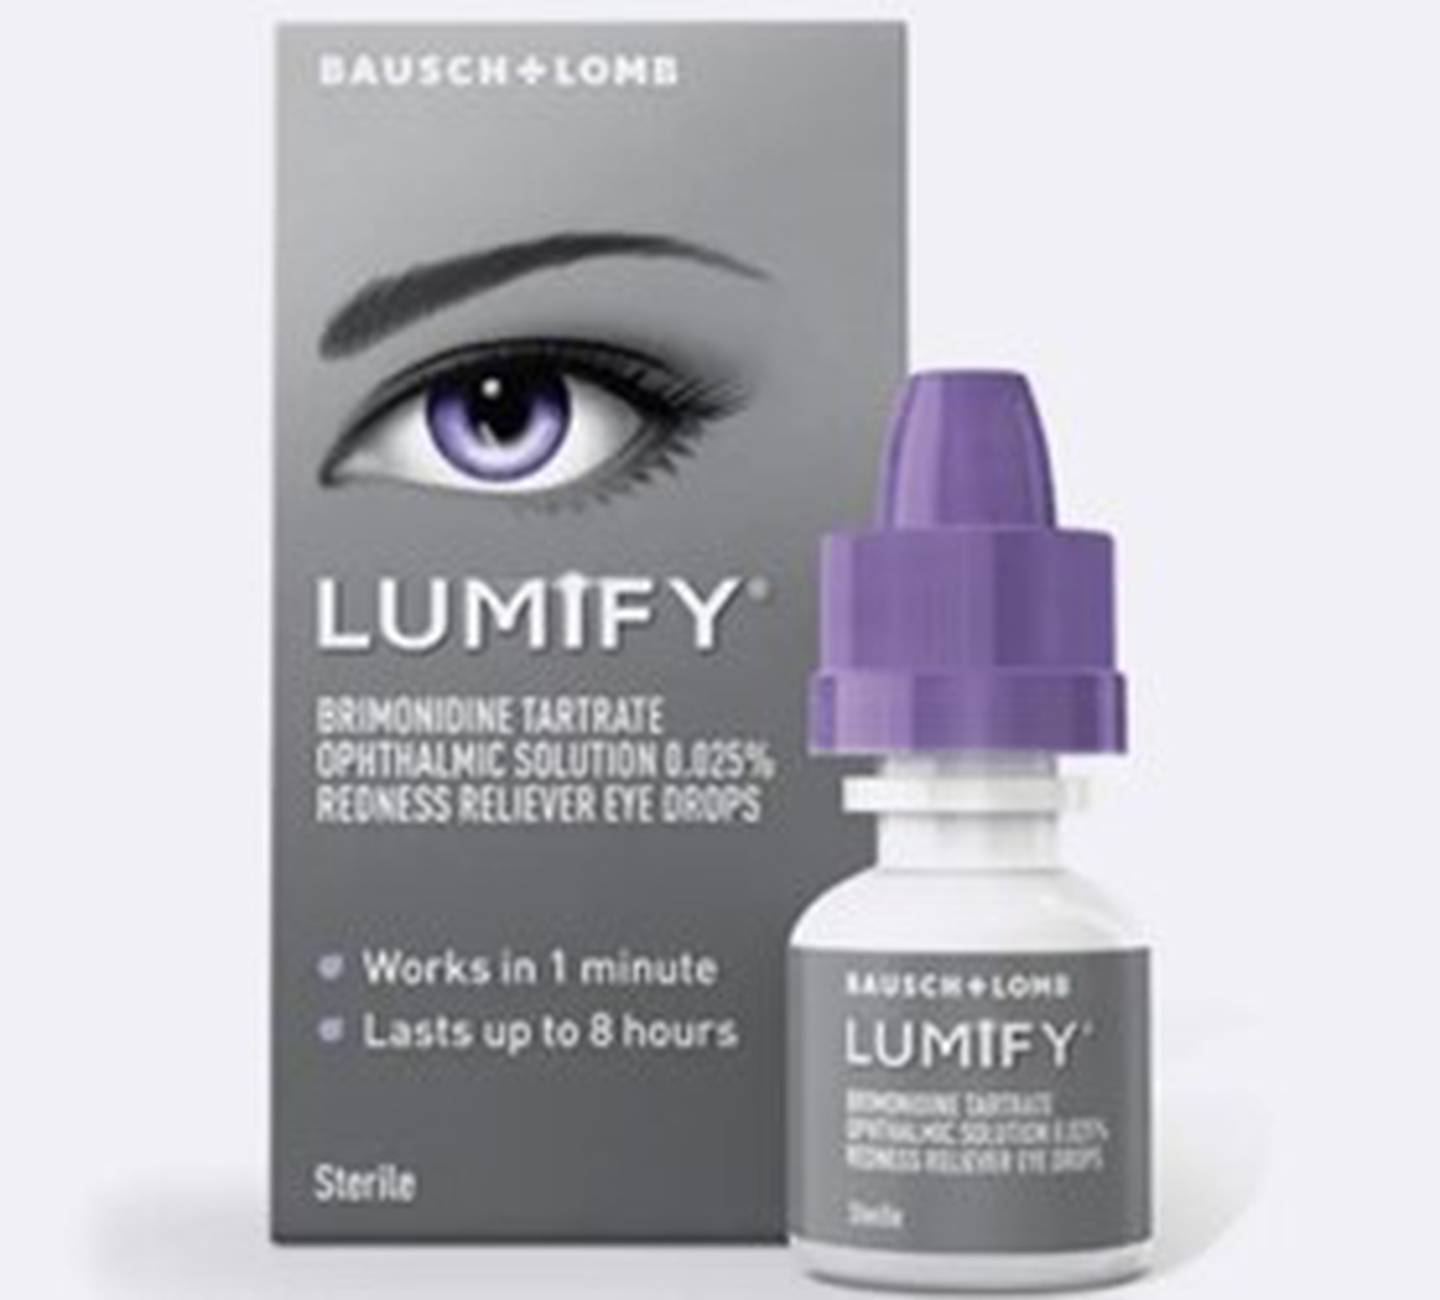 The agency went on to caution consumers to look carefully at the packaging of the brands because it resembles Bausch + Lomb's Lumify brand eye drops, which is an over-the-counter product that's FDA-approved for redness relief.